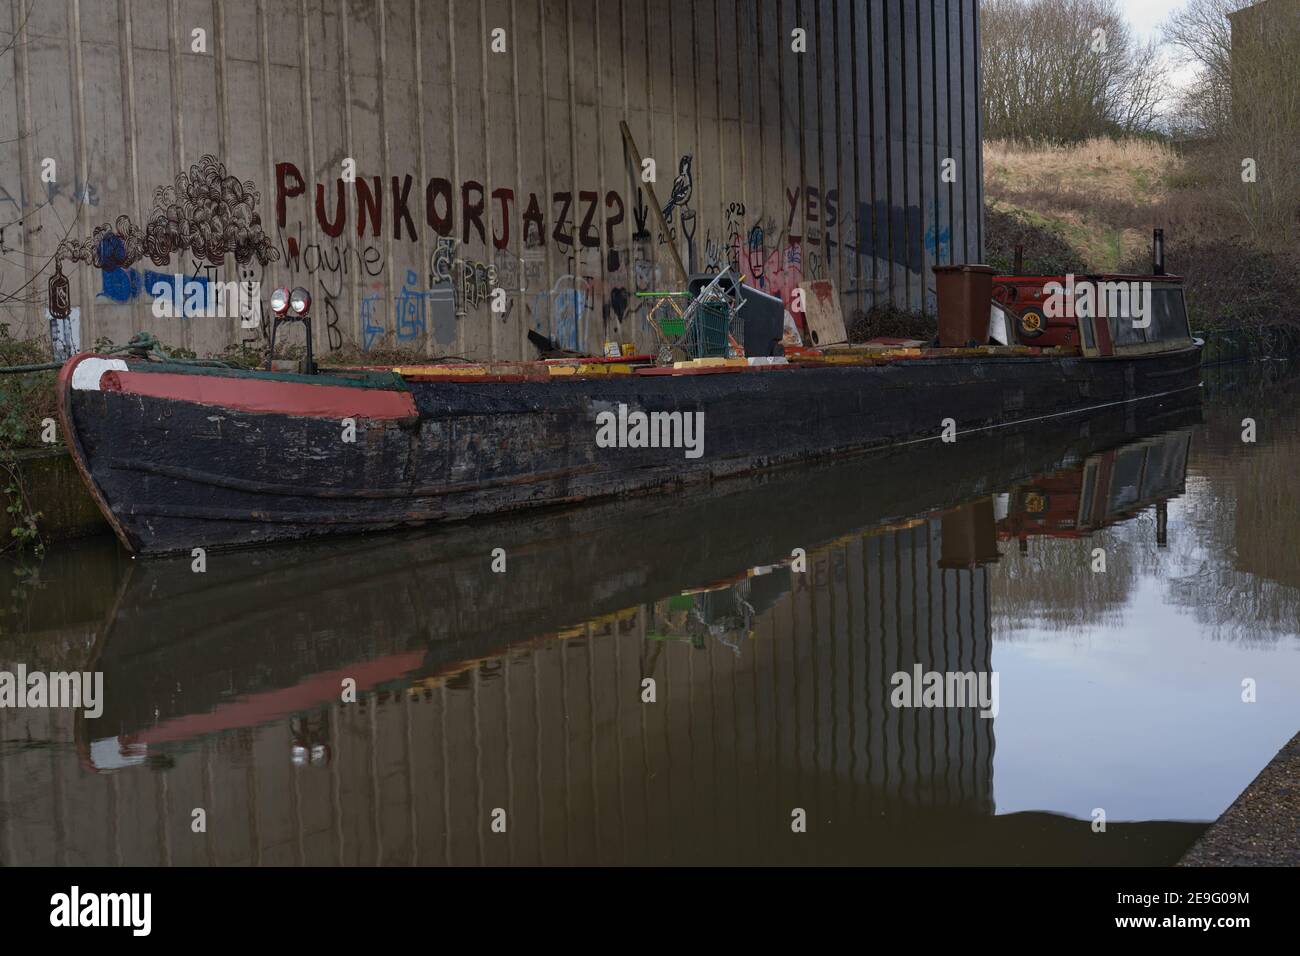 Hippy looking canal boat with a nice backdrop of grafitti including the words Punk or Jazz Stock Photo